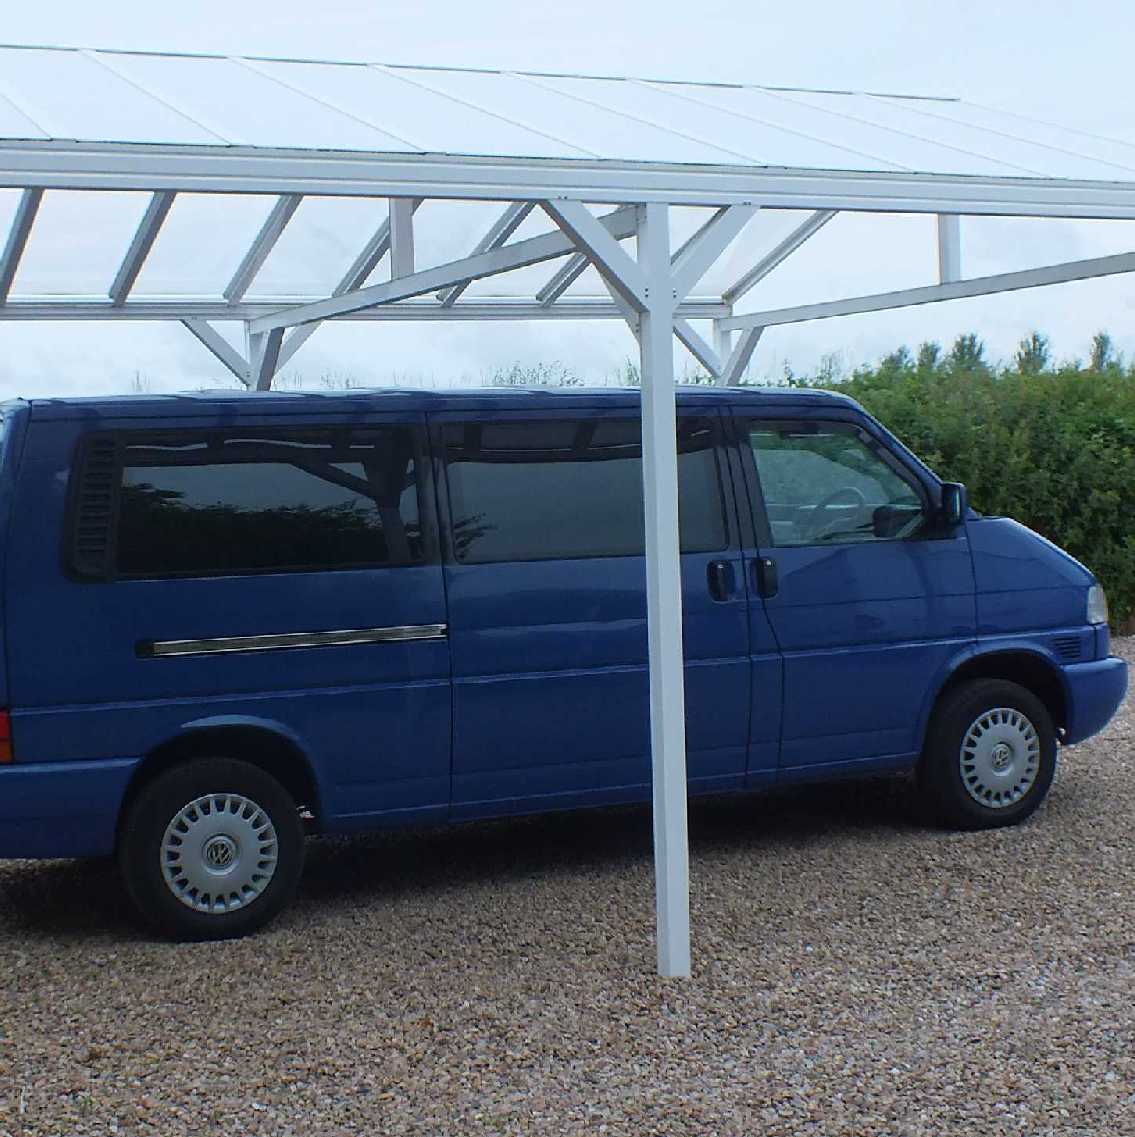 Great deals on Omega Smart Free-Standing, White Gable-Roof (type 1) Canopy with 16mm Polycarbonate Glazing - 4.2m (W) x 4.0m (P), (6) Supporting Posts